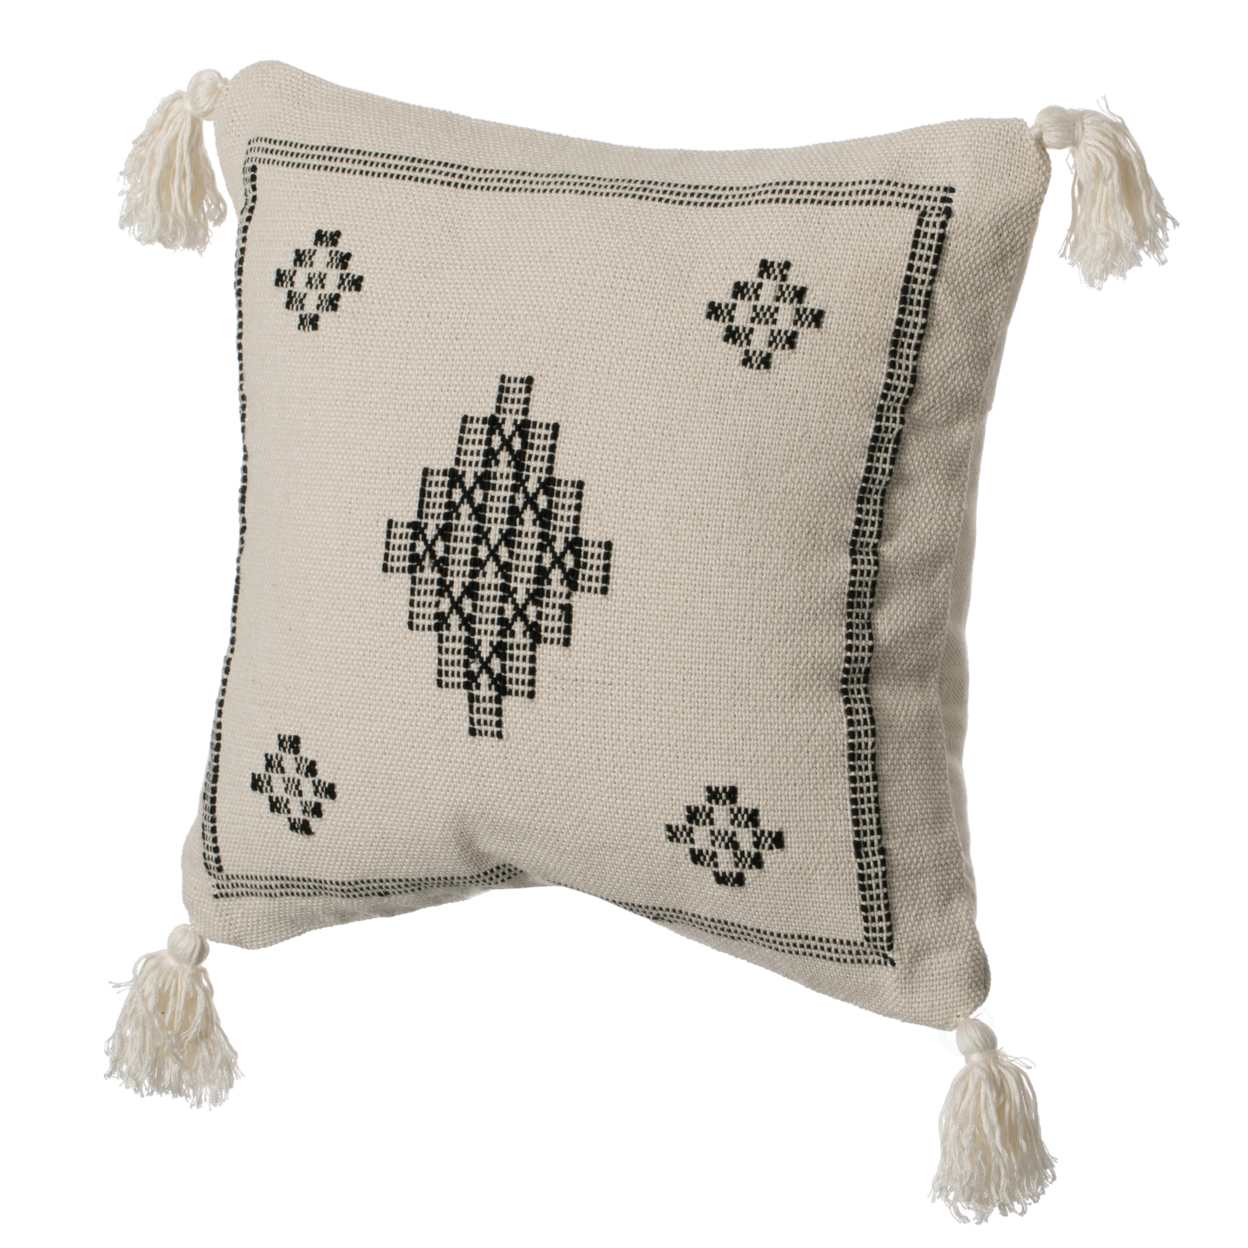 Deerlux 16" Throw Pillow Cover with Southwest Tribal Pattern and Corner Tassels